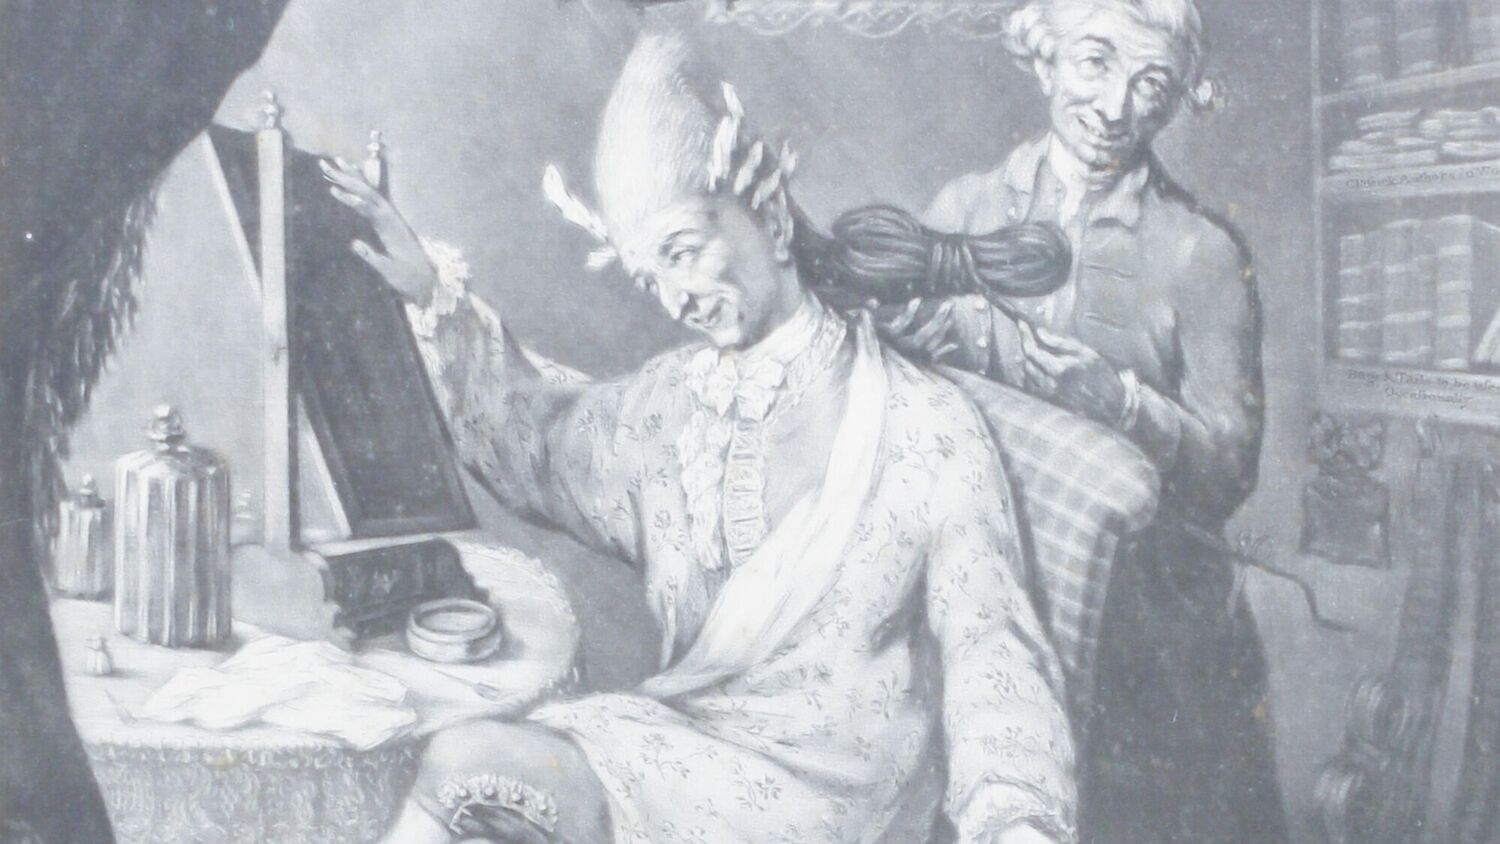 Black and white caricature of a man in a large white wig seated at a table, being attended to by a servant.